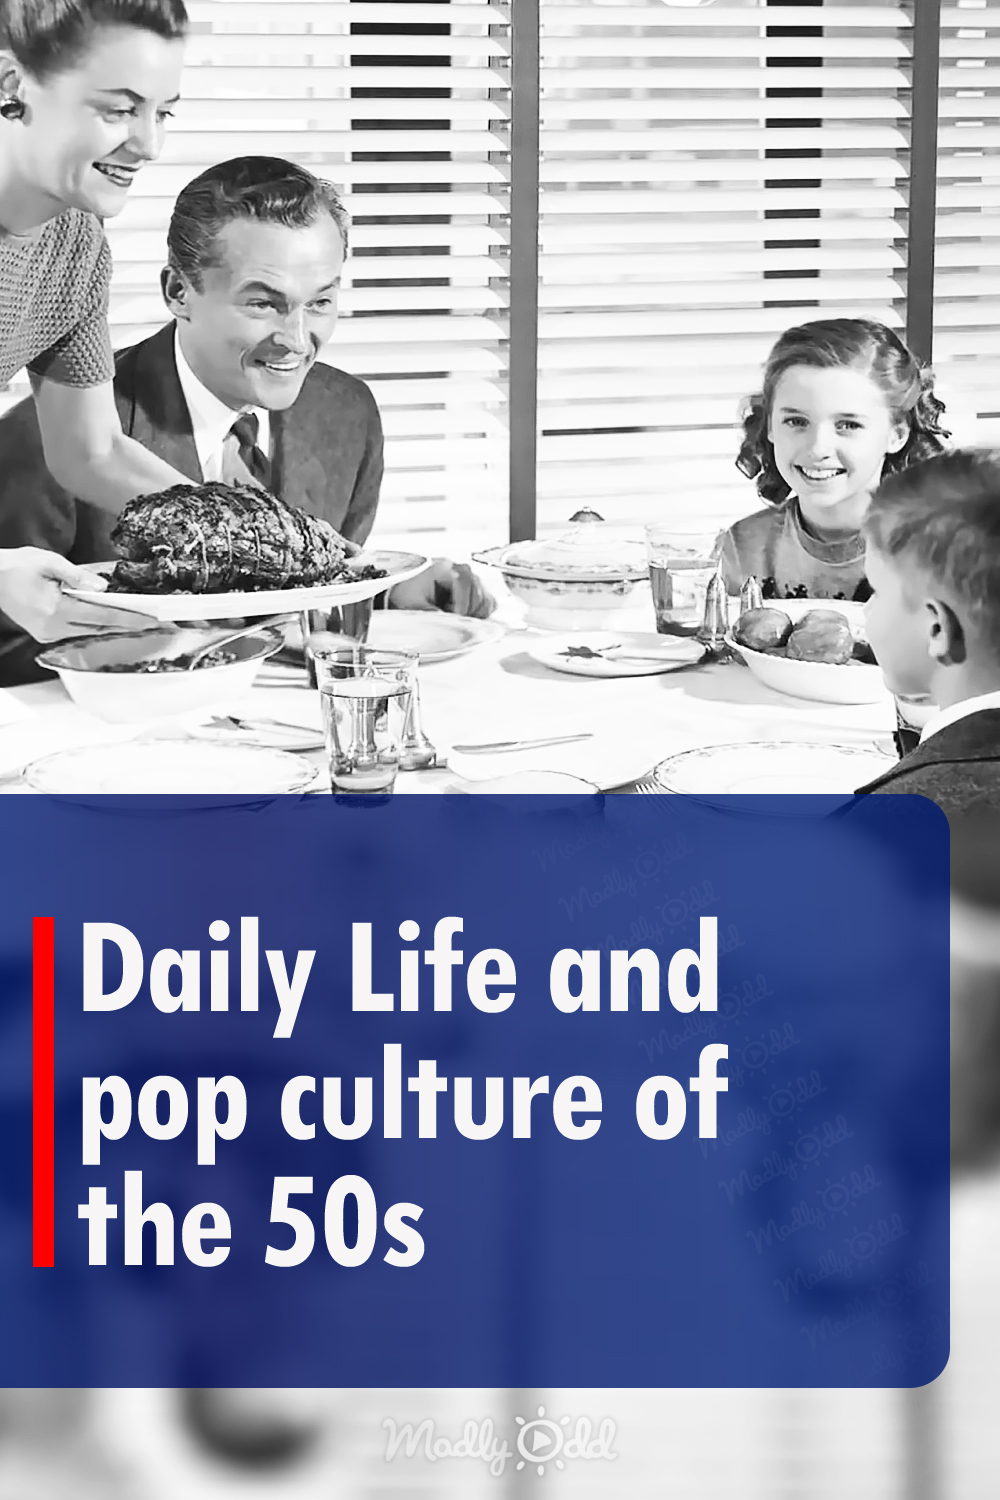 Daily Life and pop culture of the 50s